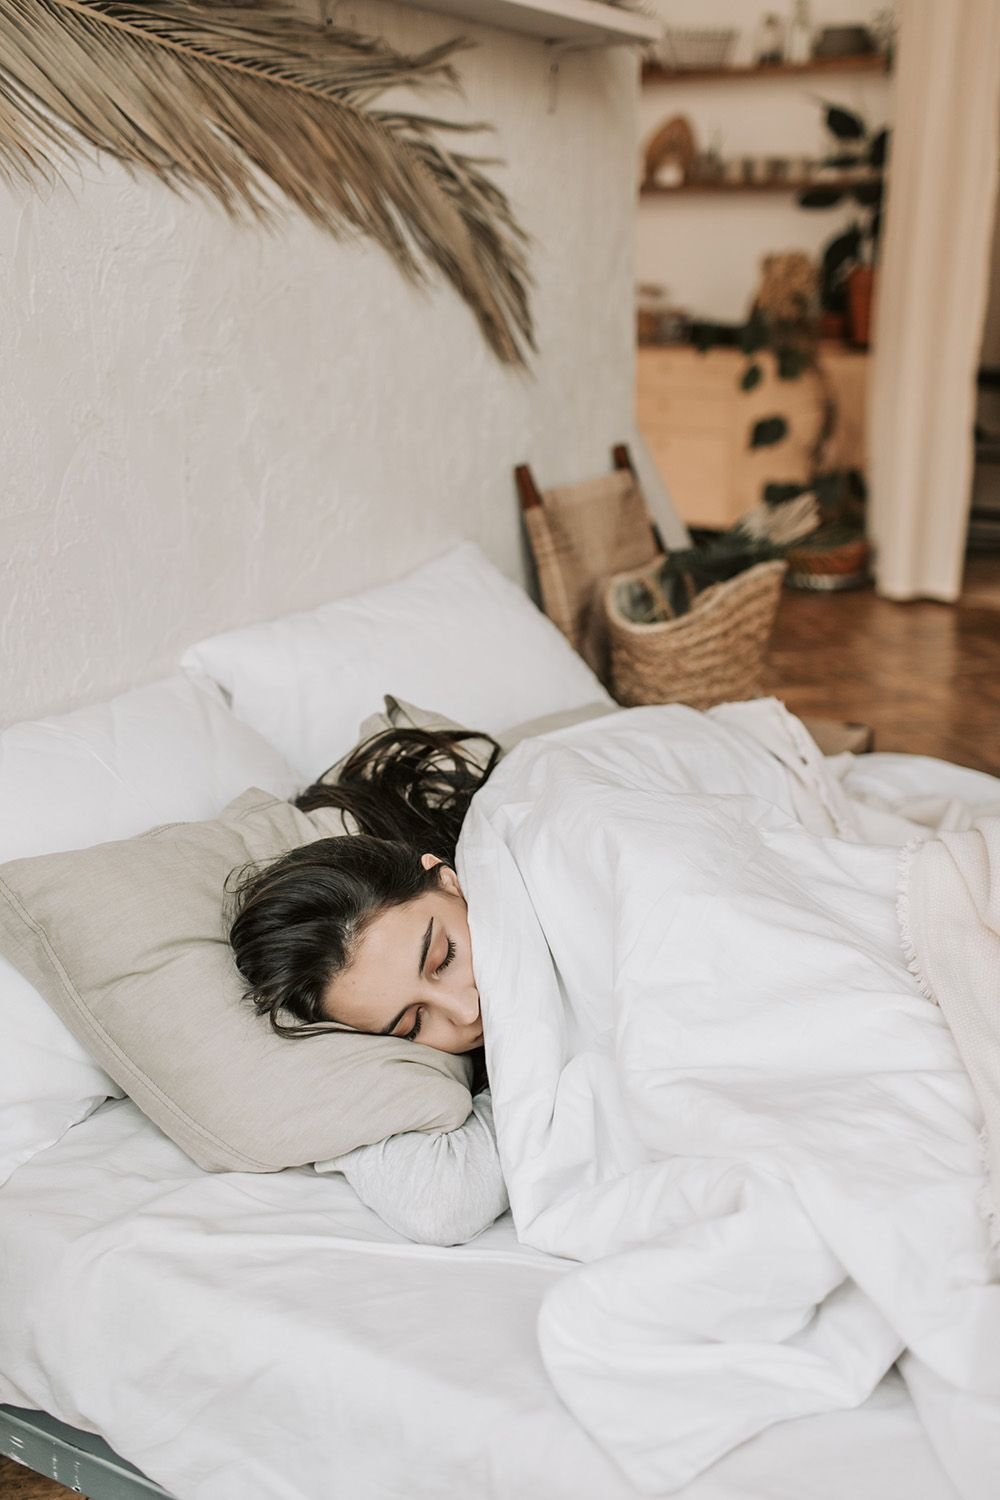 8 methods to help you avoid staying up late to protect your health 2